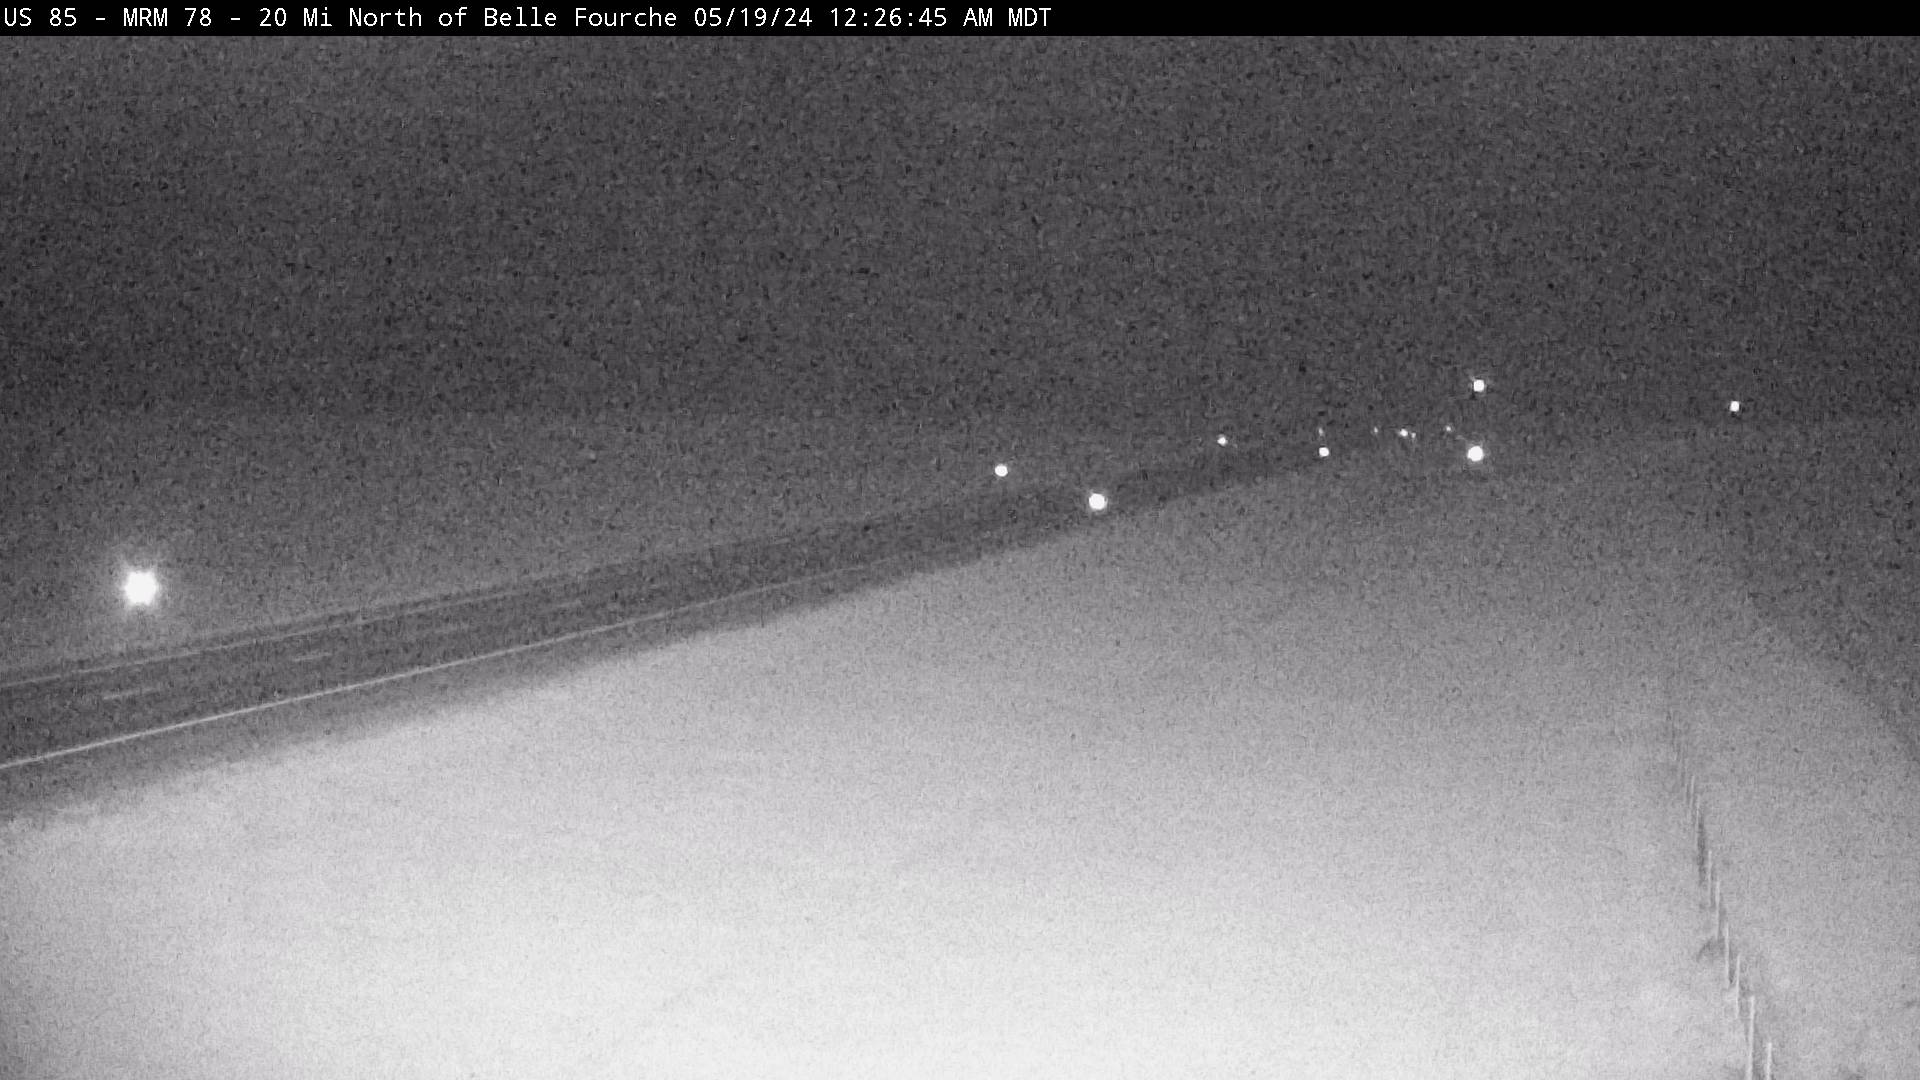 Traffic Cam 20 miles north of Belle Fourche along US-85 @ MP 78 - Northeast Player